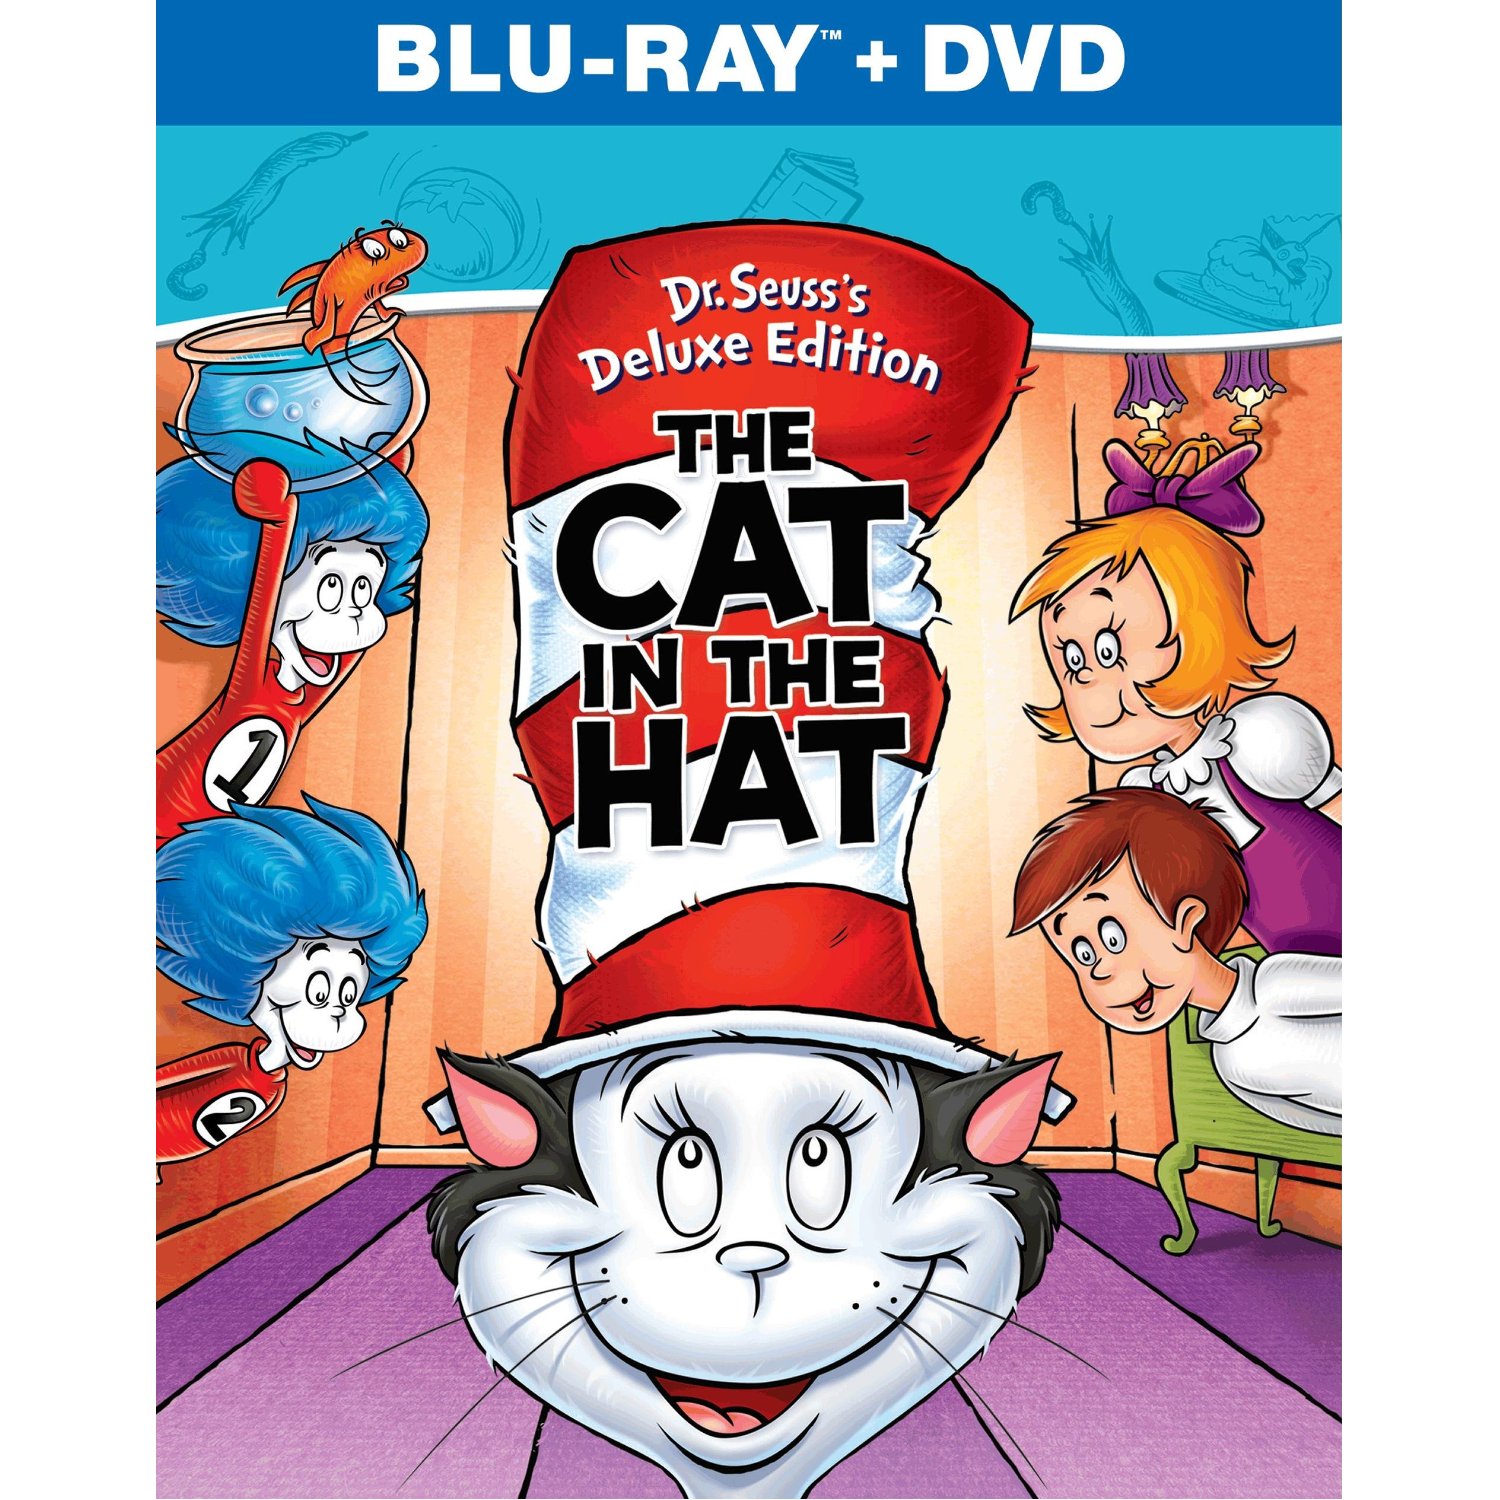 "Dr. Seuss's The Cat in the Hat" Available on DVD and Blu-ray August 7